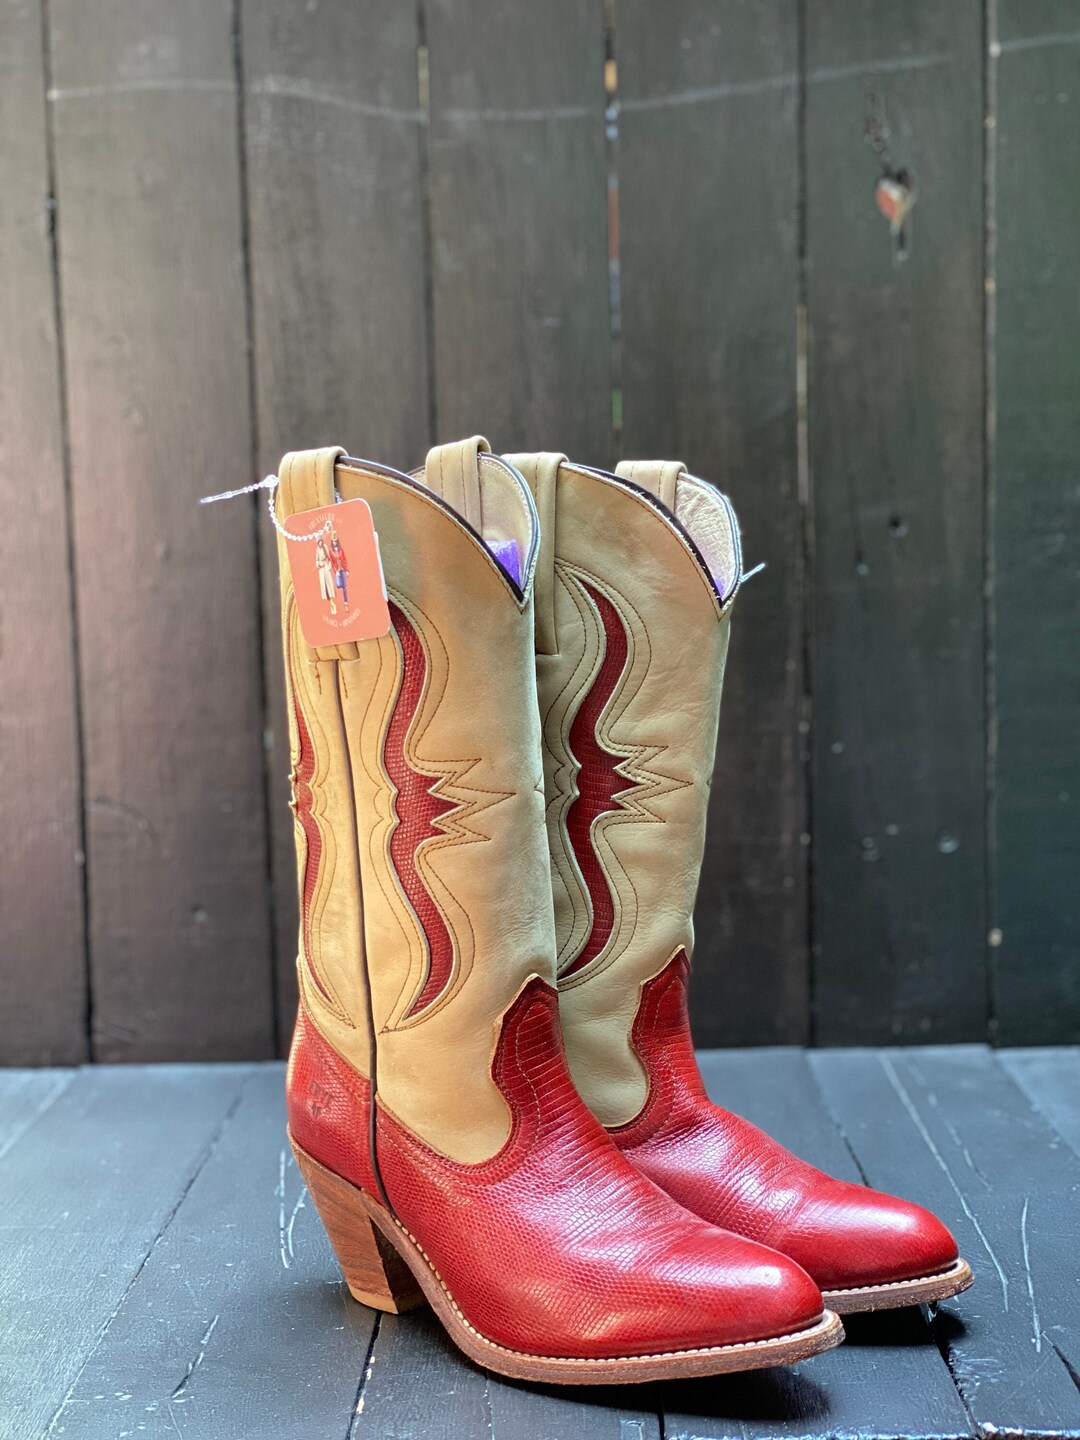 Womens Us 7.5 Red Cowgirl Boots Vintage Cowgirl Boots - Etsy